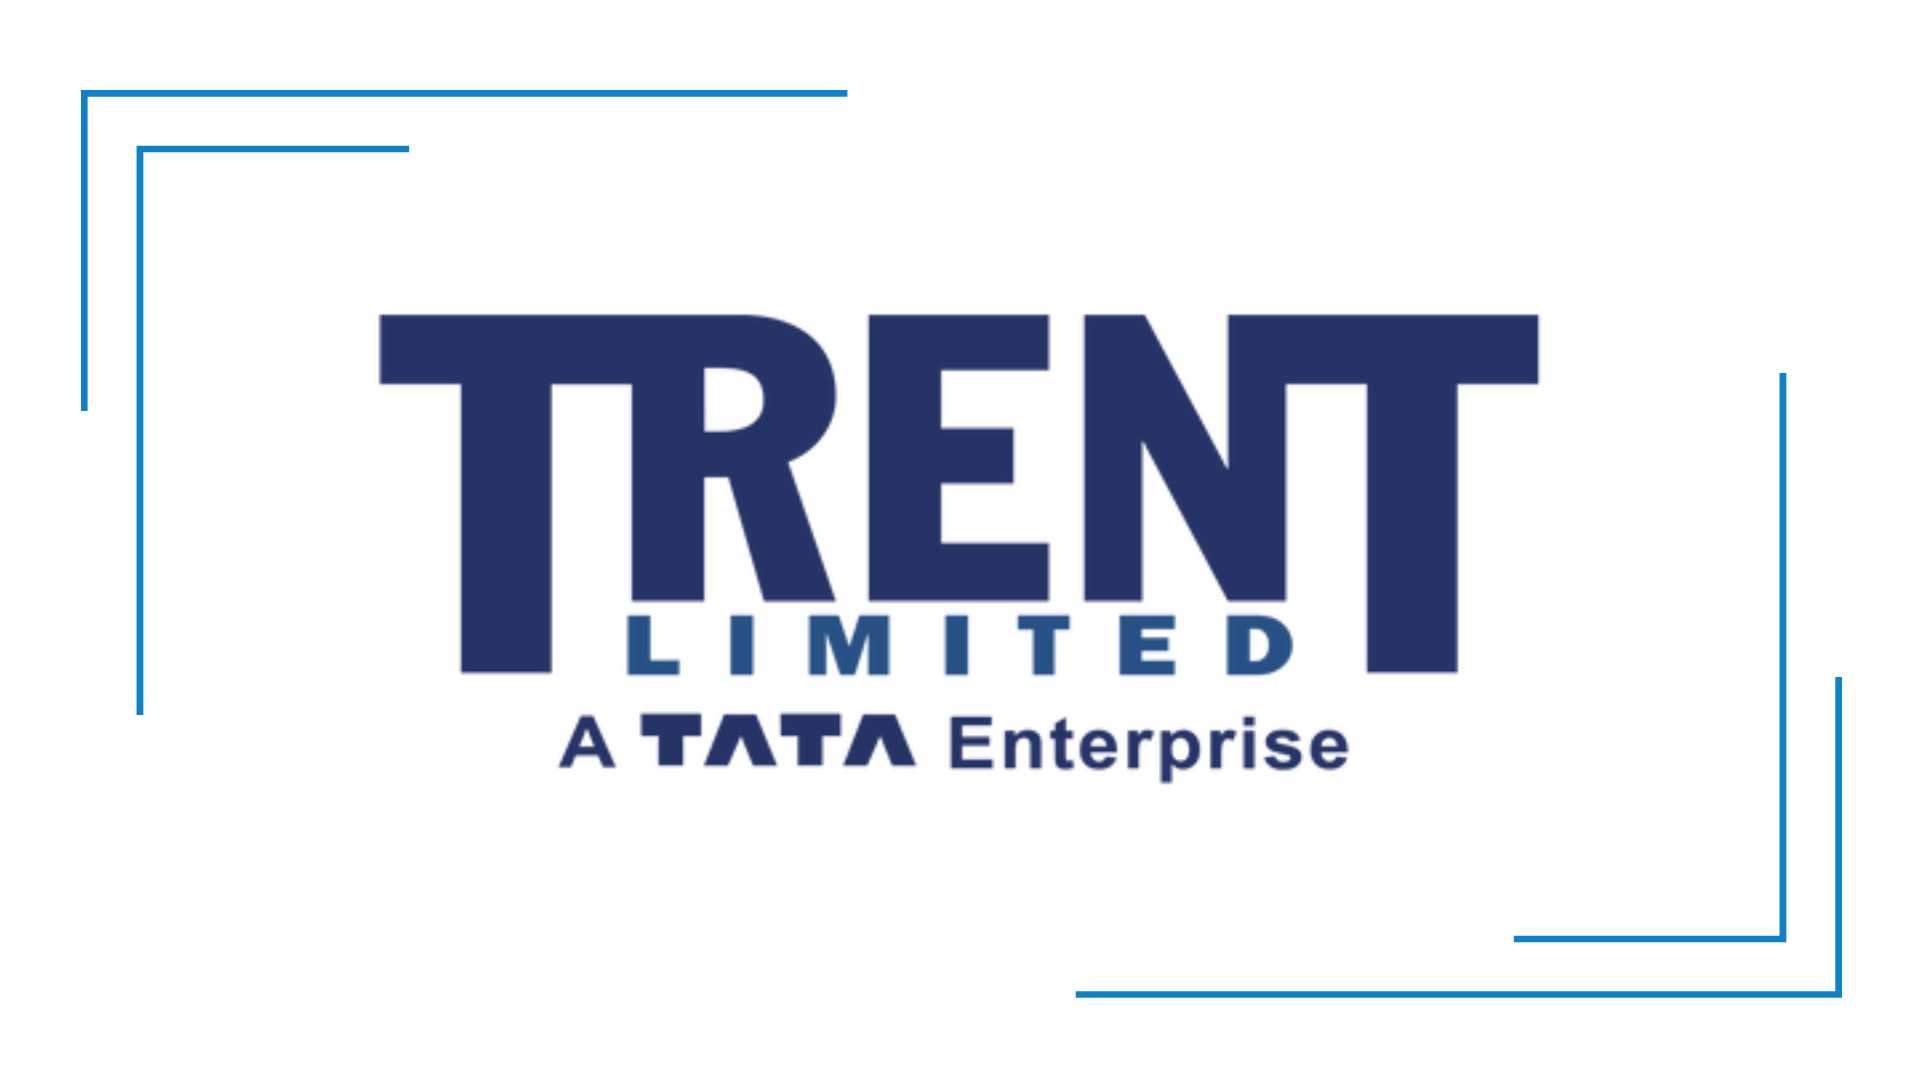 Trent - List of Companies Owned by Tata Group